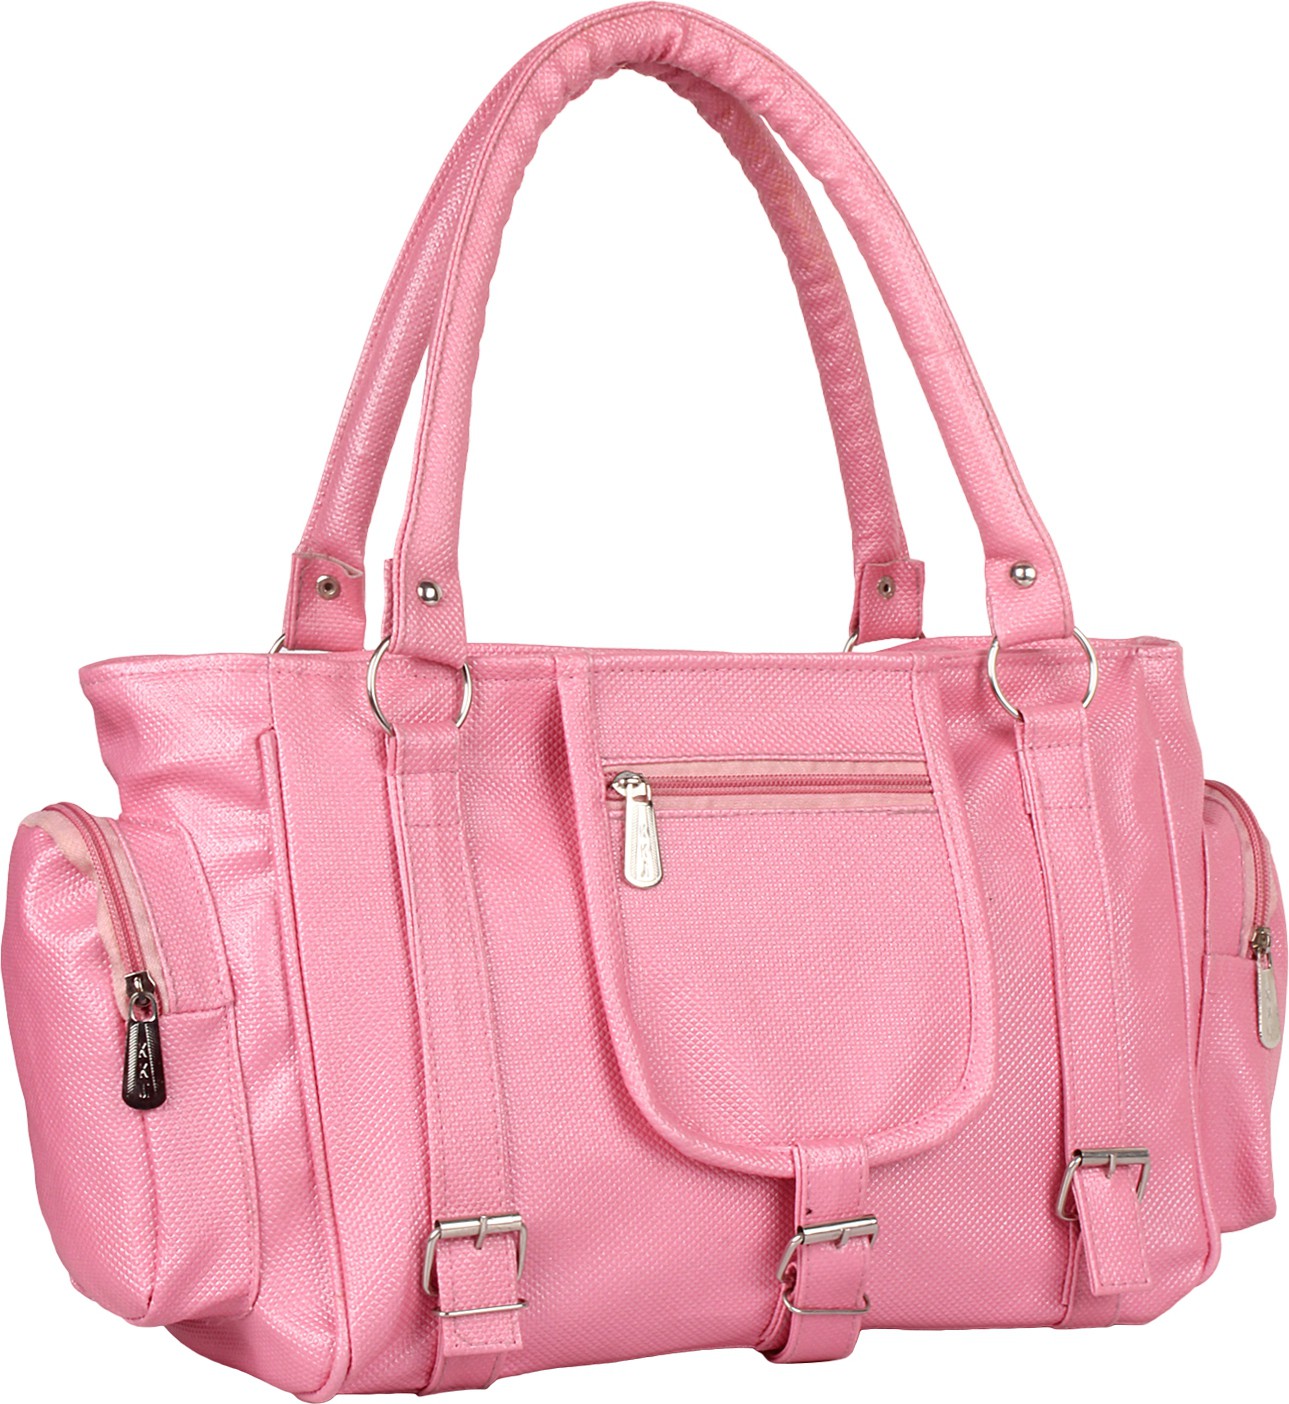 Typify Women Hand Bag - TBAG51